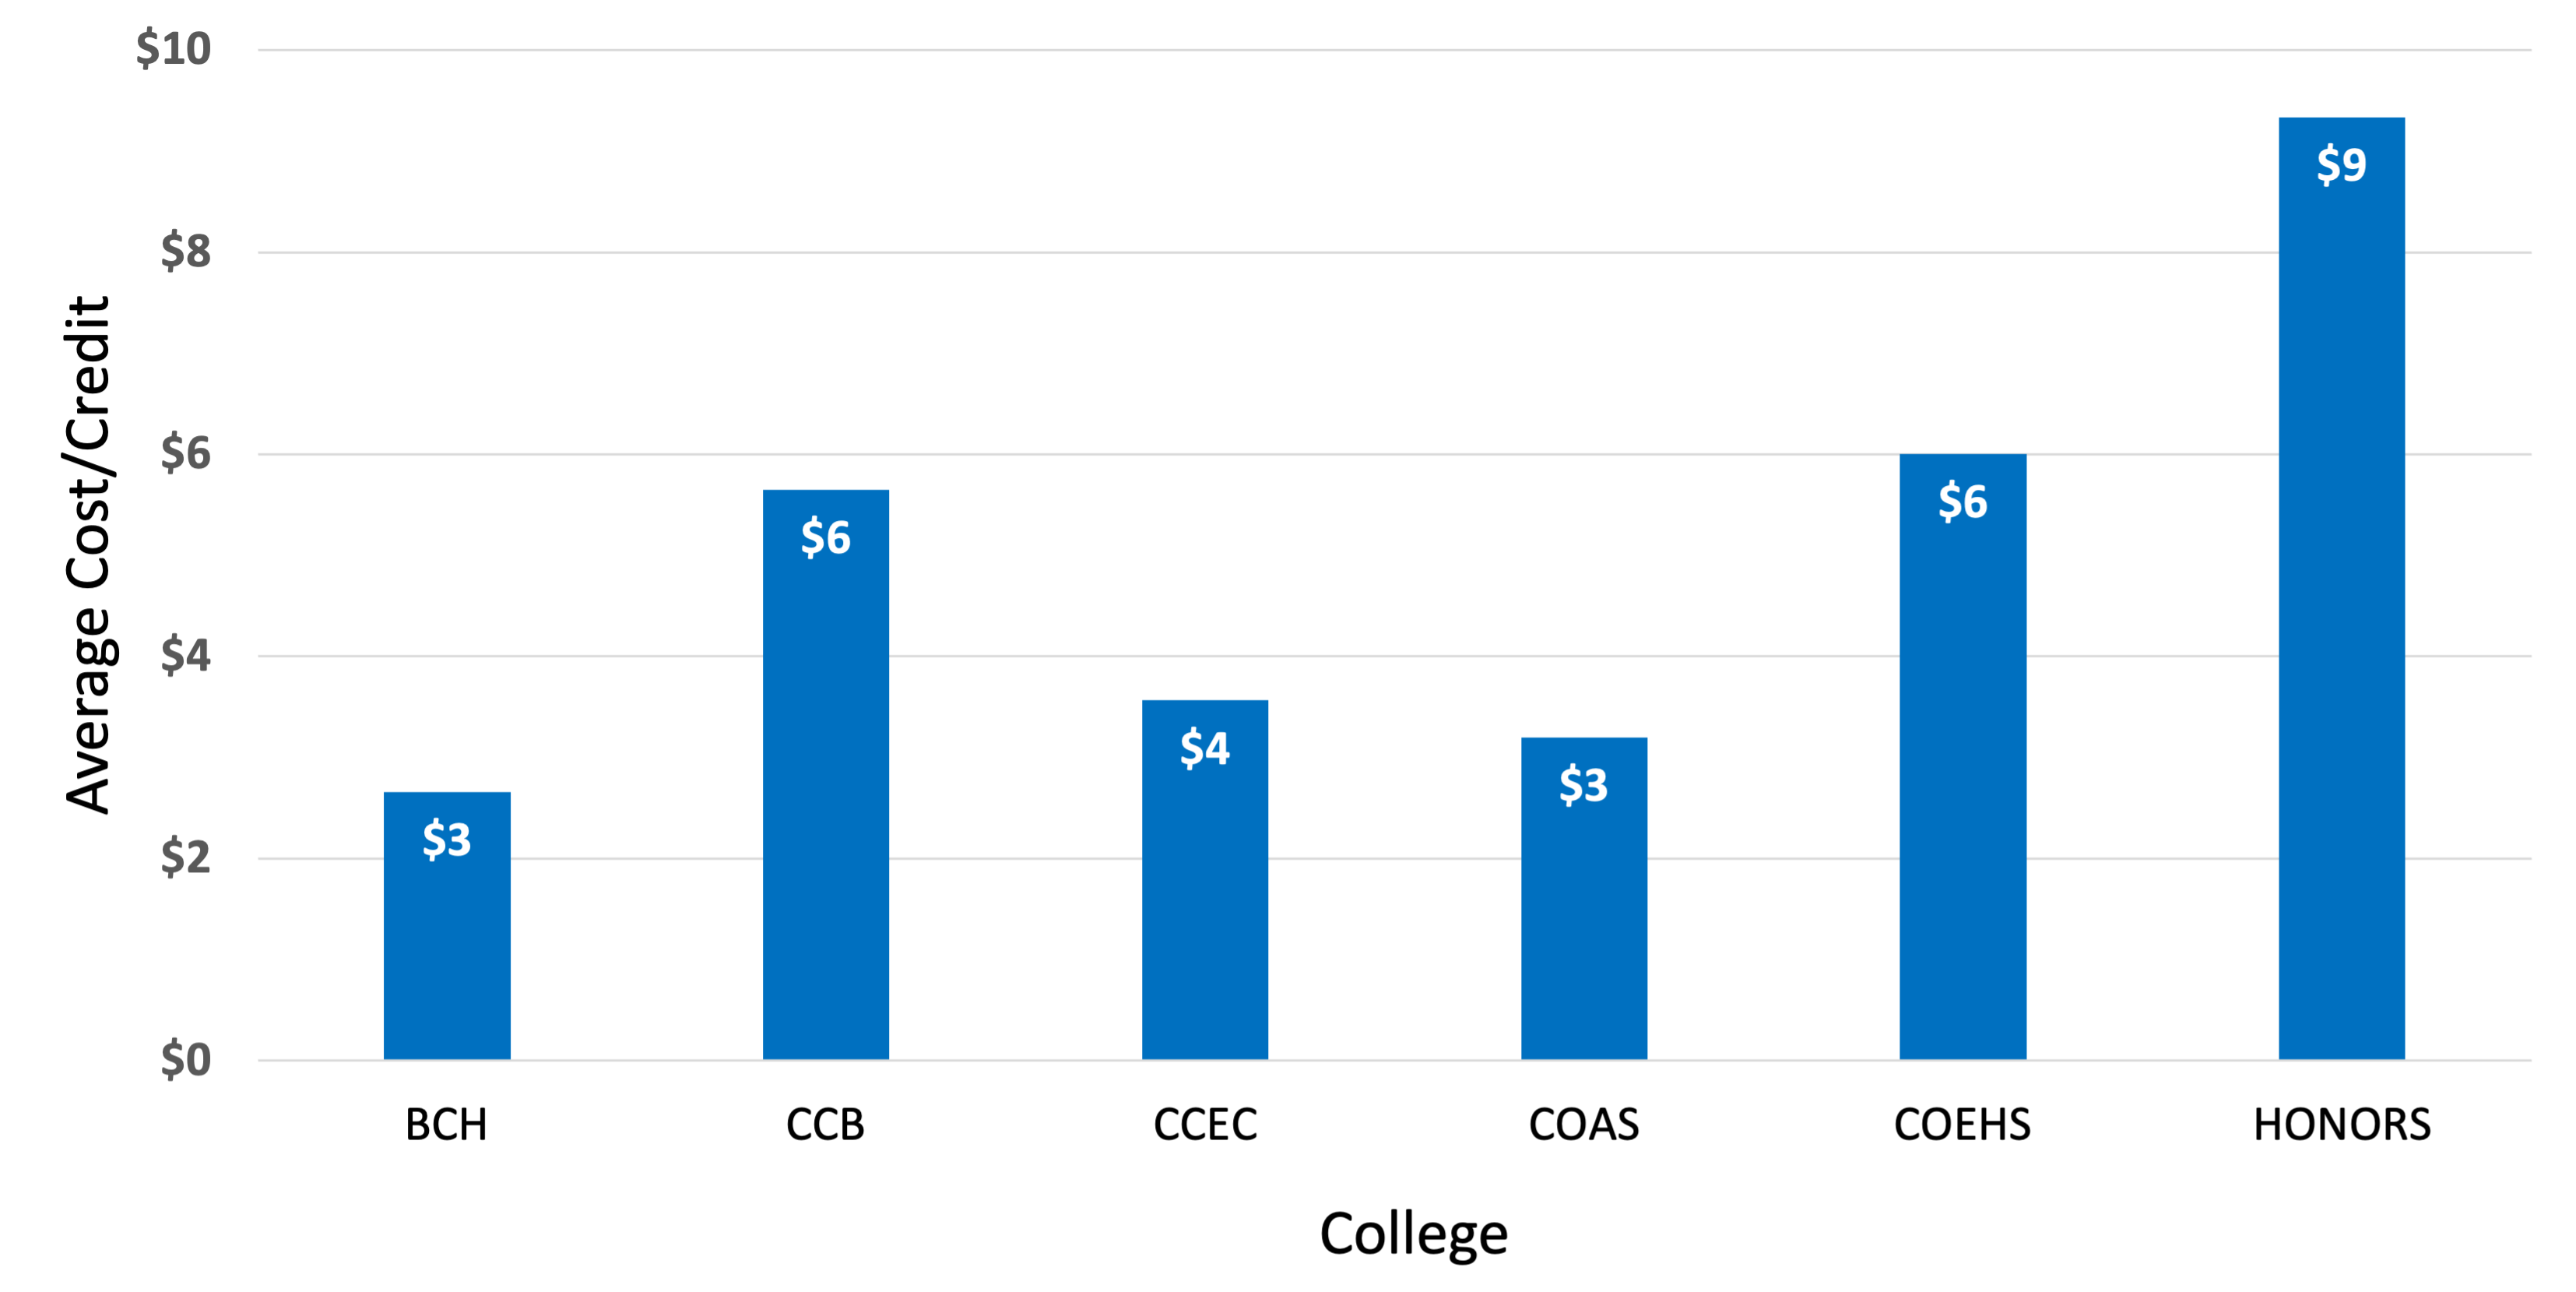 Vertical-bar char of average cost per credit by college for courses awarded the affordability counts medallion